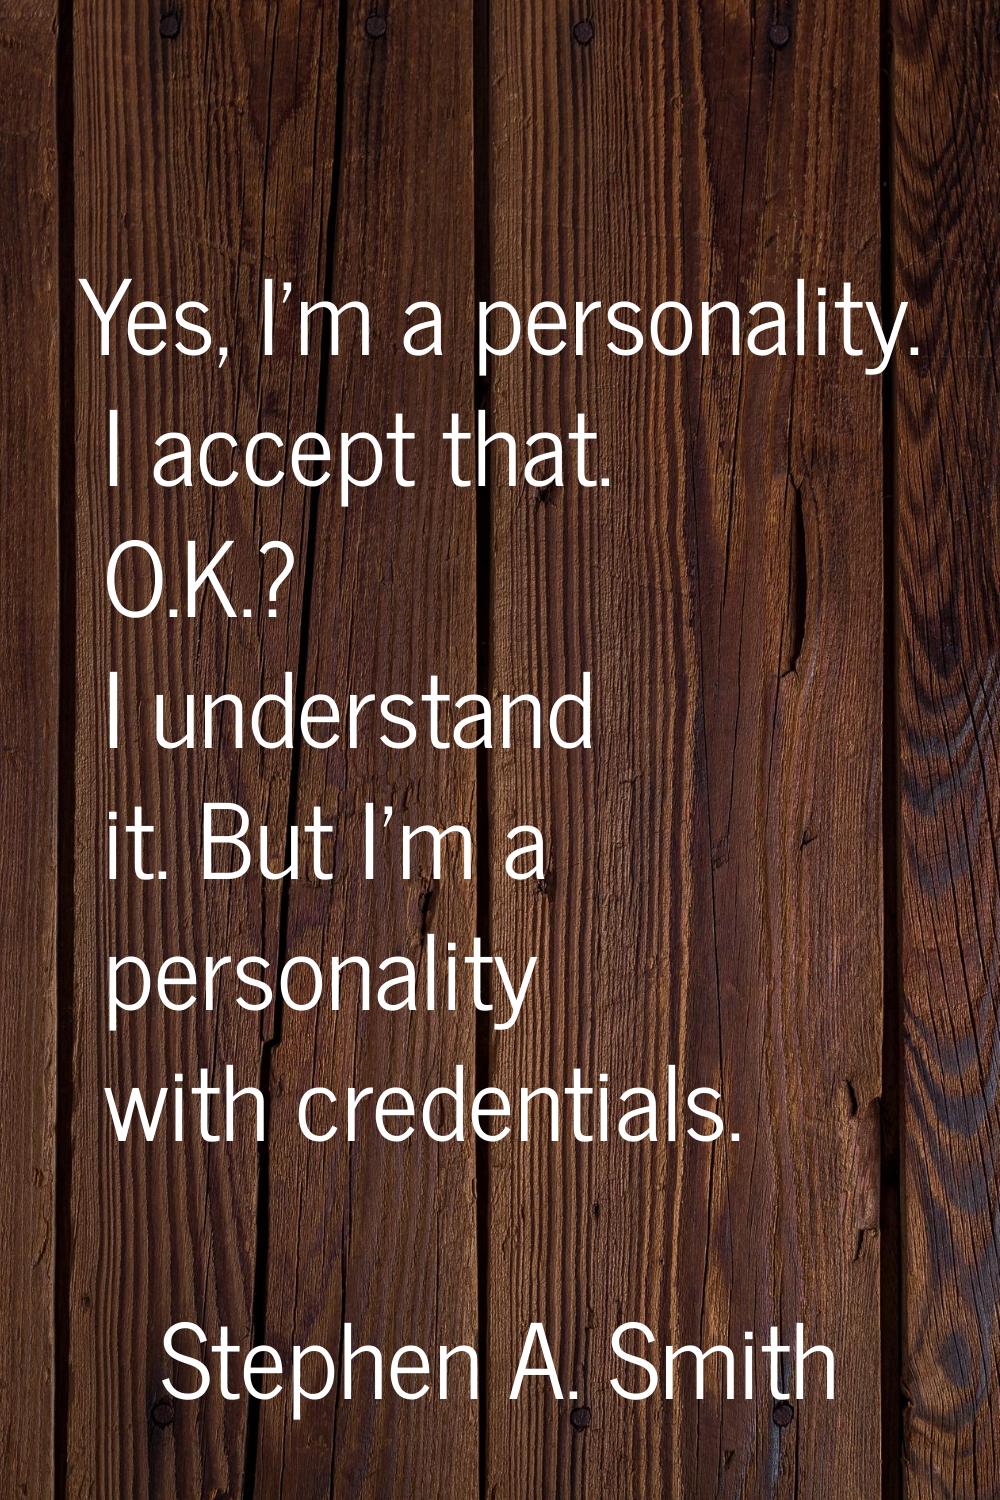 Yes, I'm a personality. I accept that. O.K.? I understand it. But I'm a personality with credential